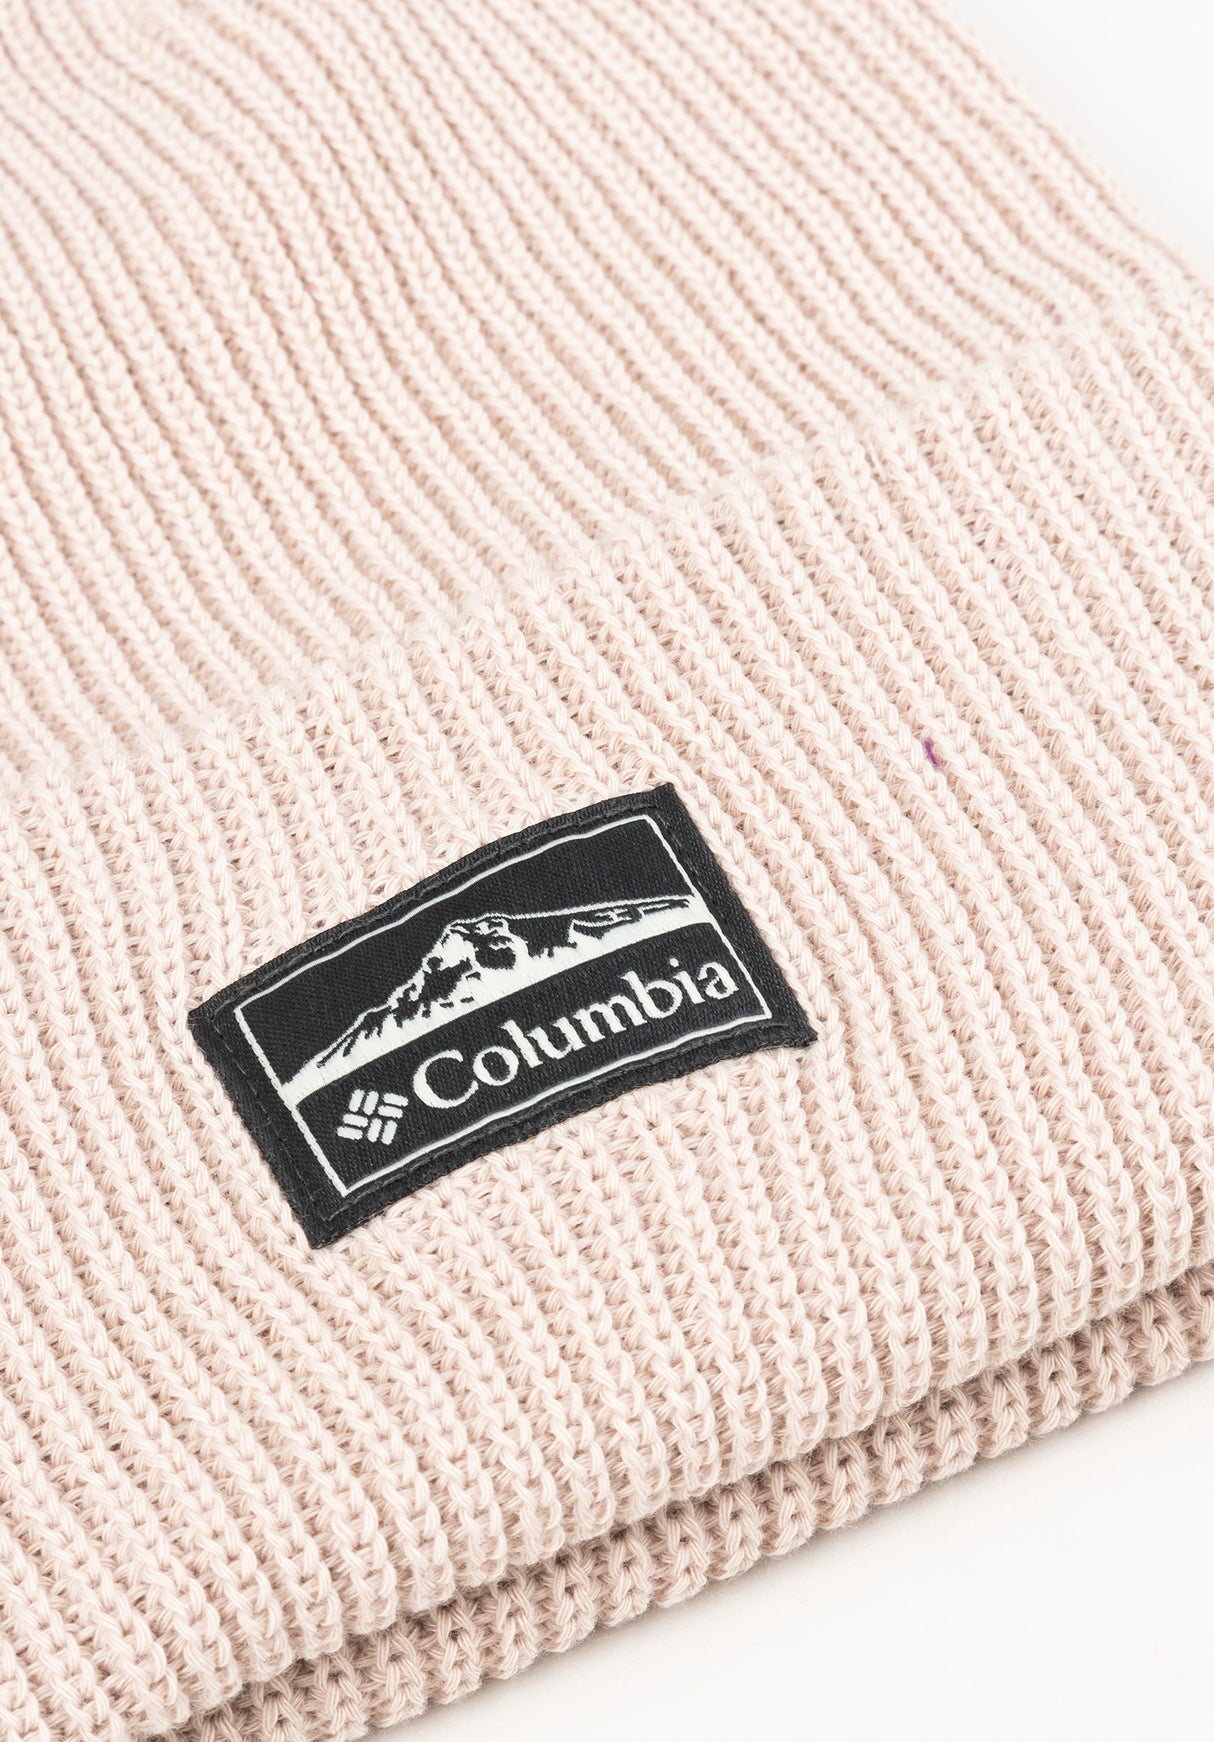 Lost Lager II Columbia Beanie for ancientfossil in Women TITUS –